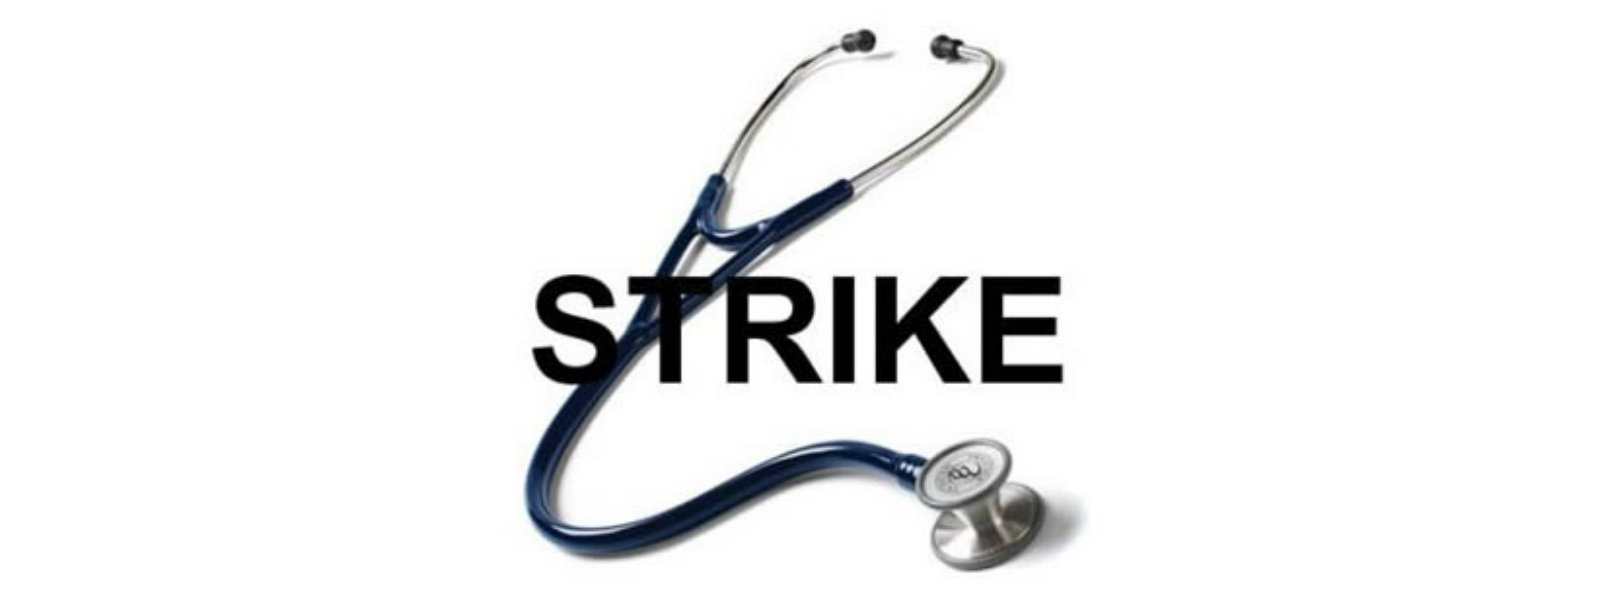 Uva Government Medical Officers' stike ends